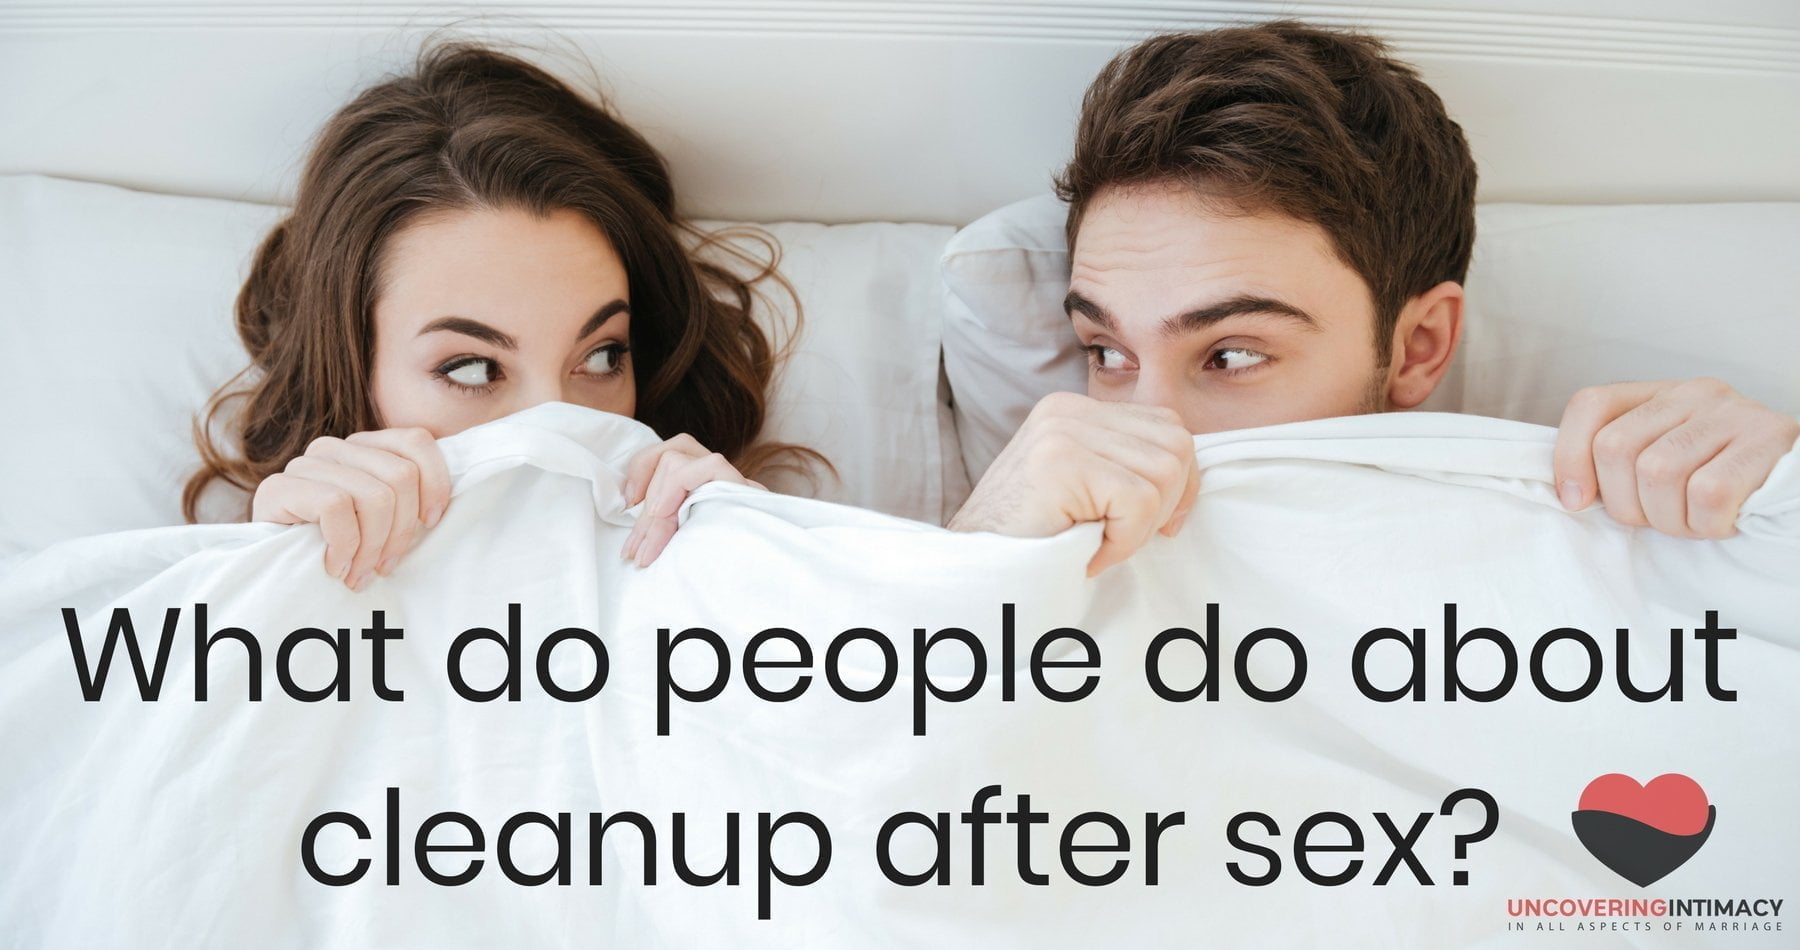 What do people do about cleanup after sex? pic